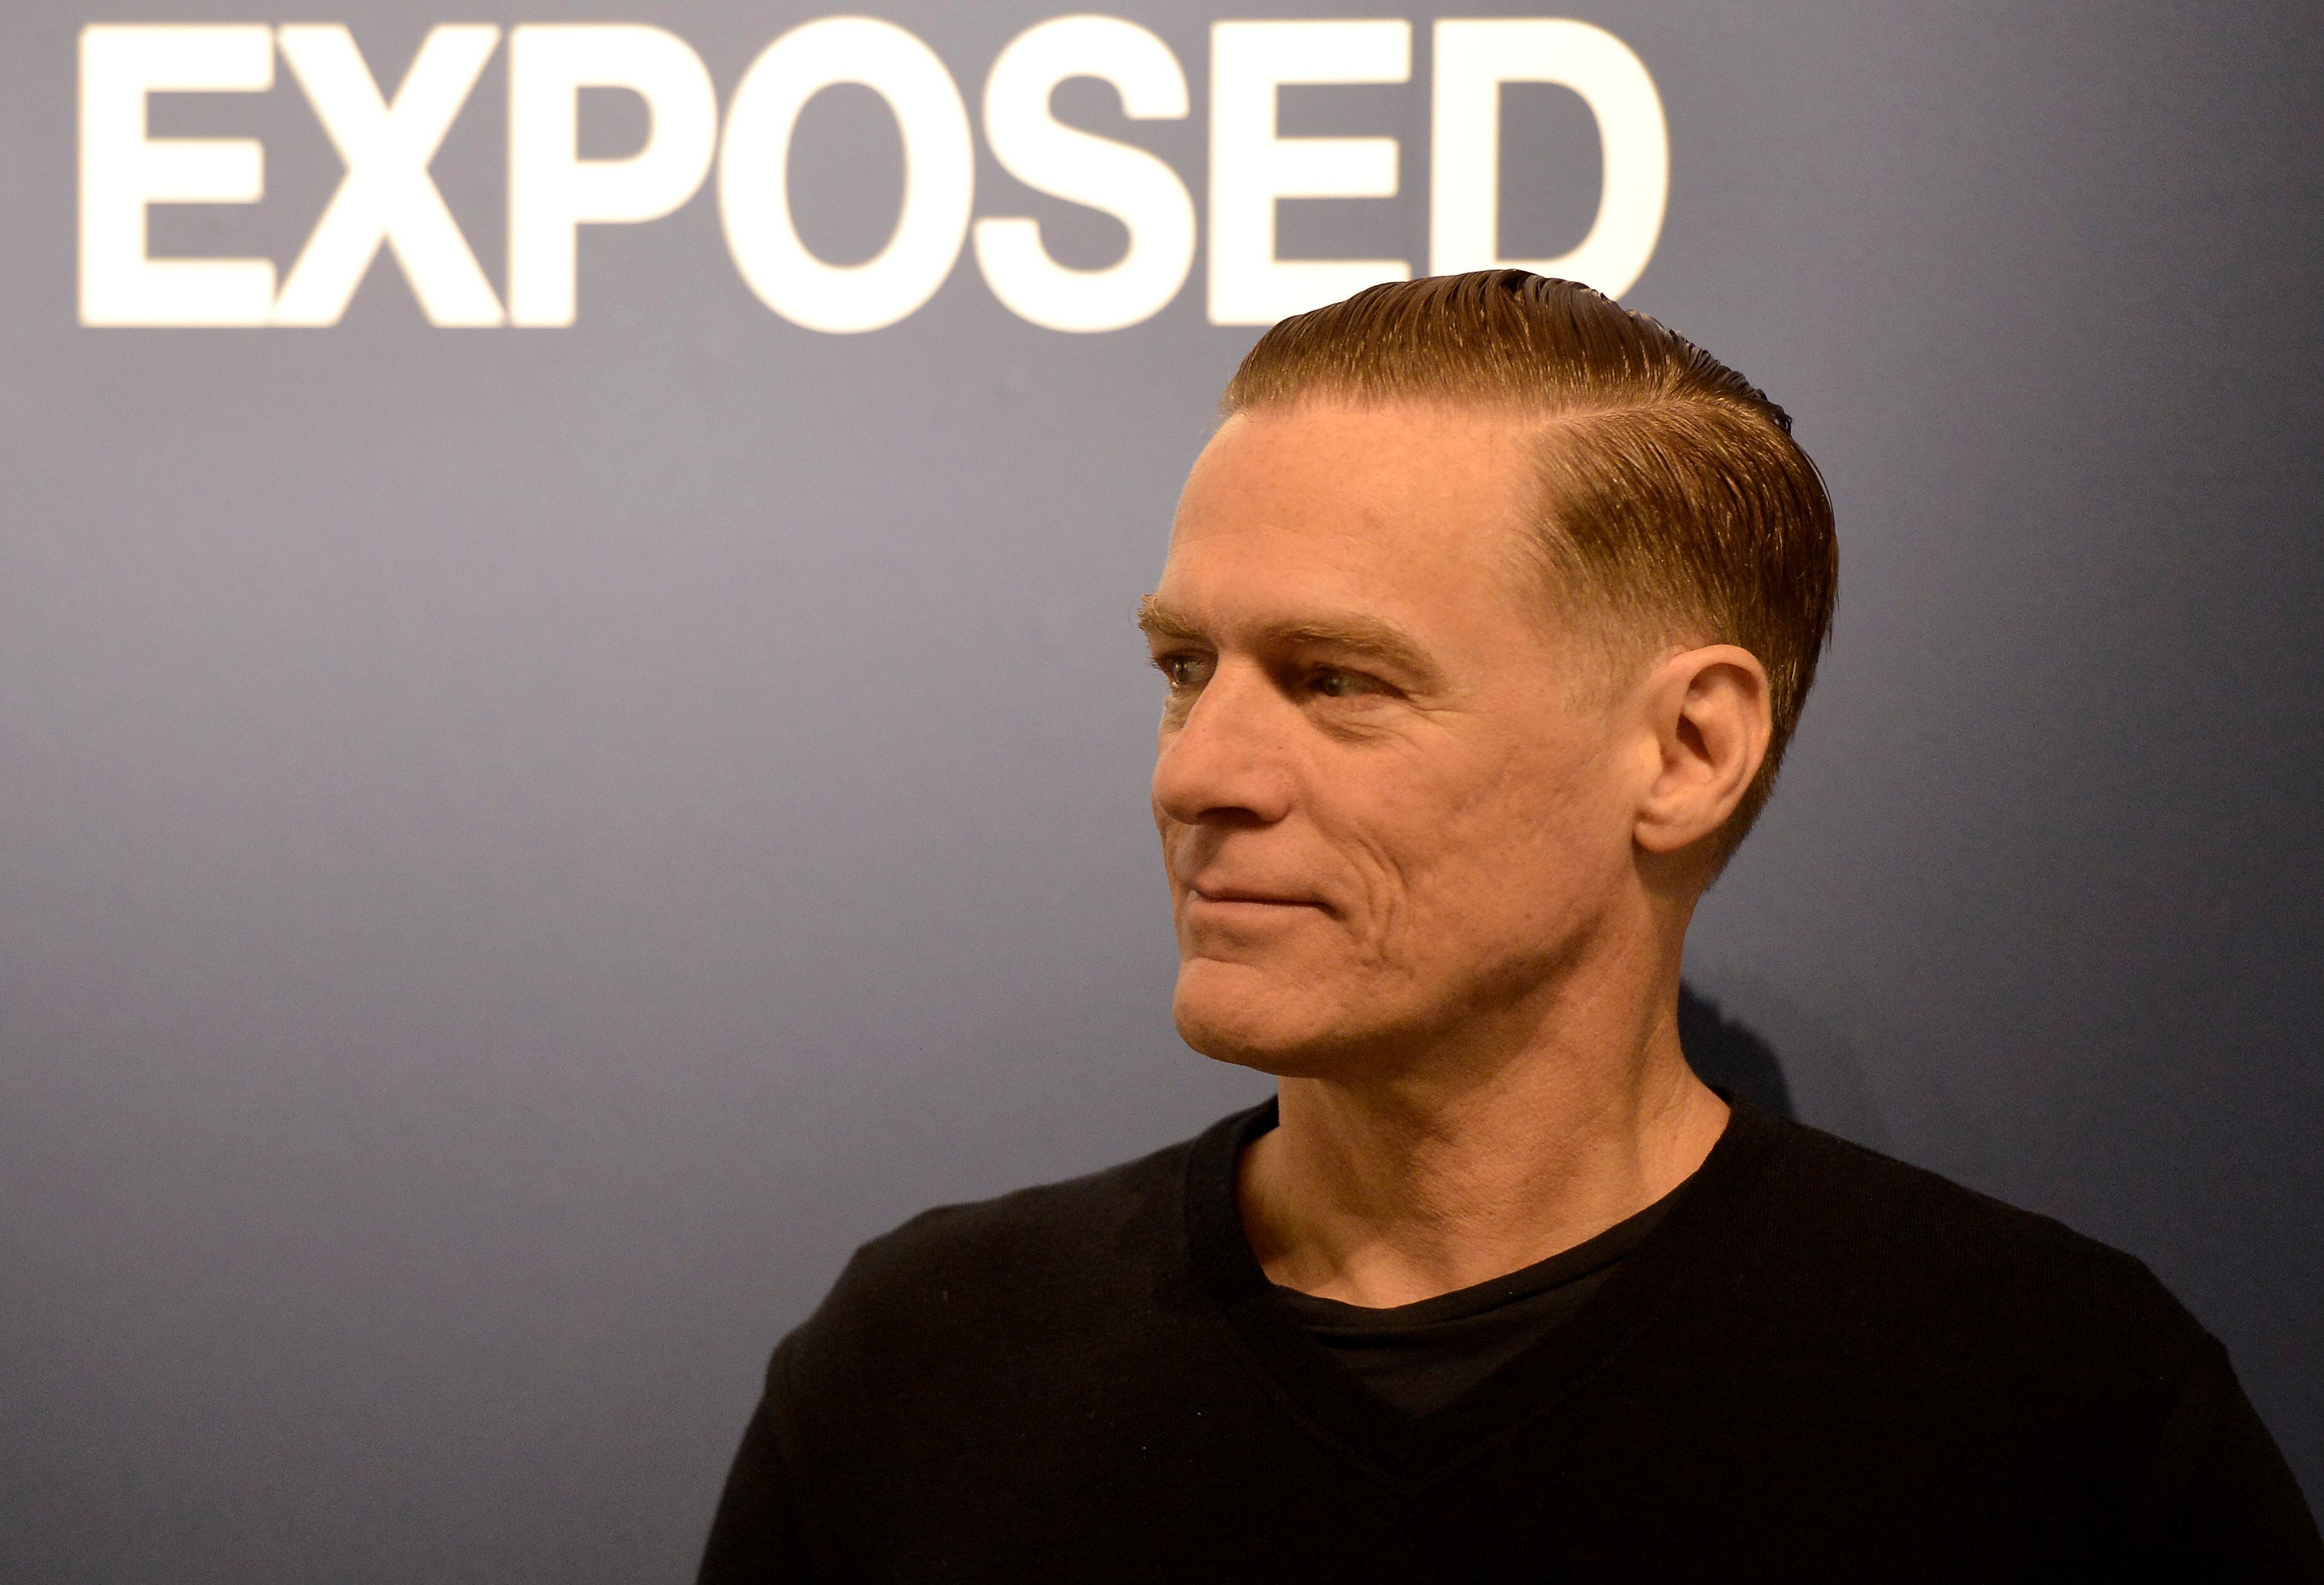 Bryan Adams tests positive for COVID in Italy